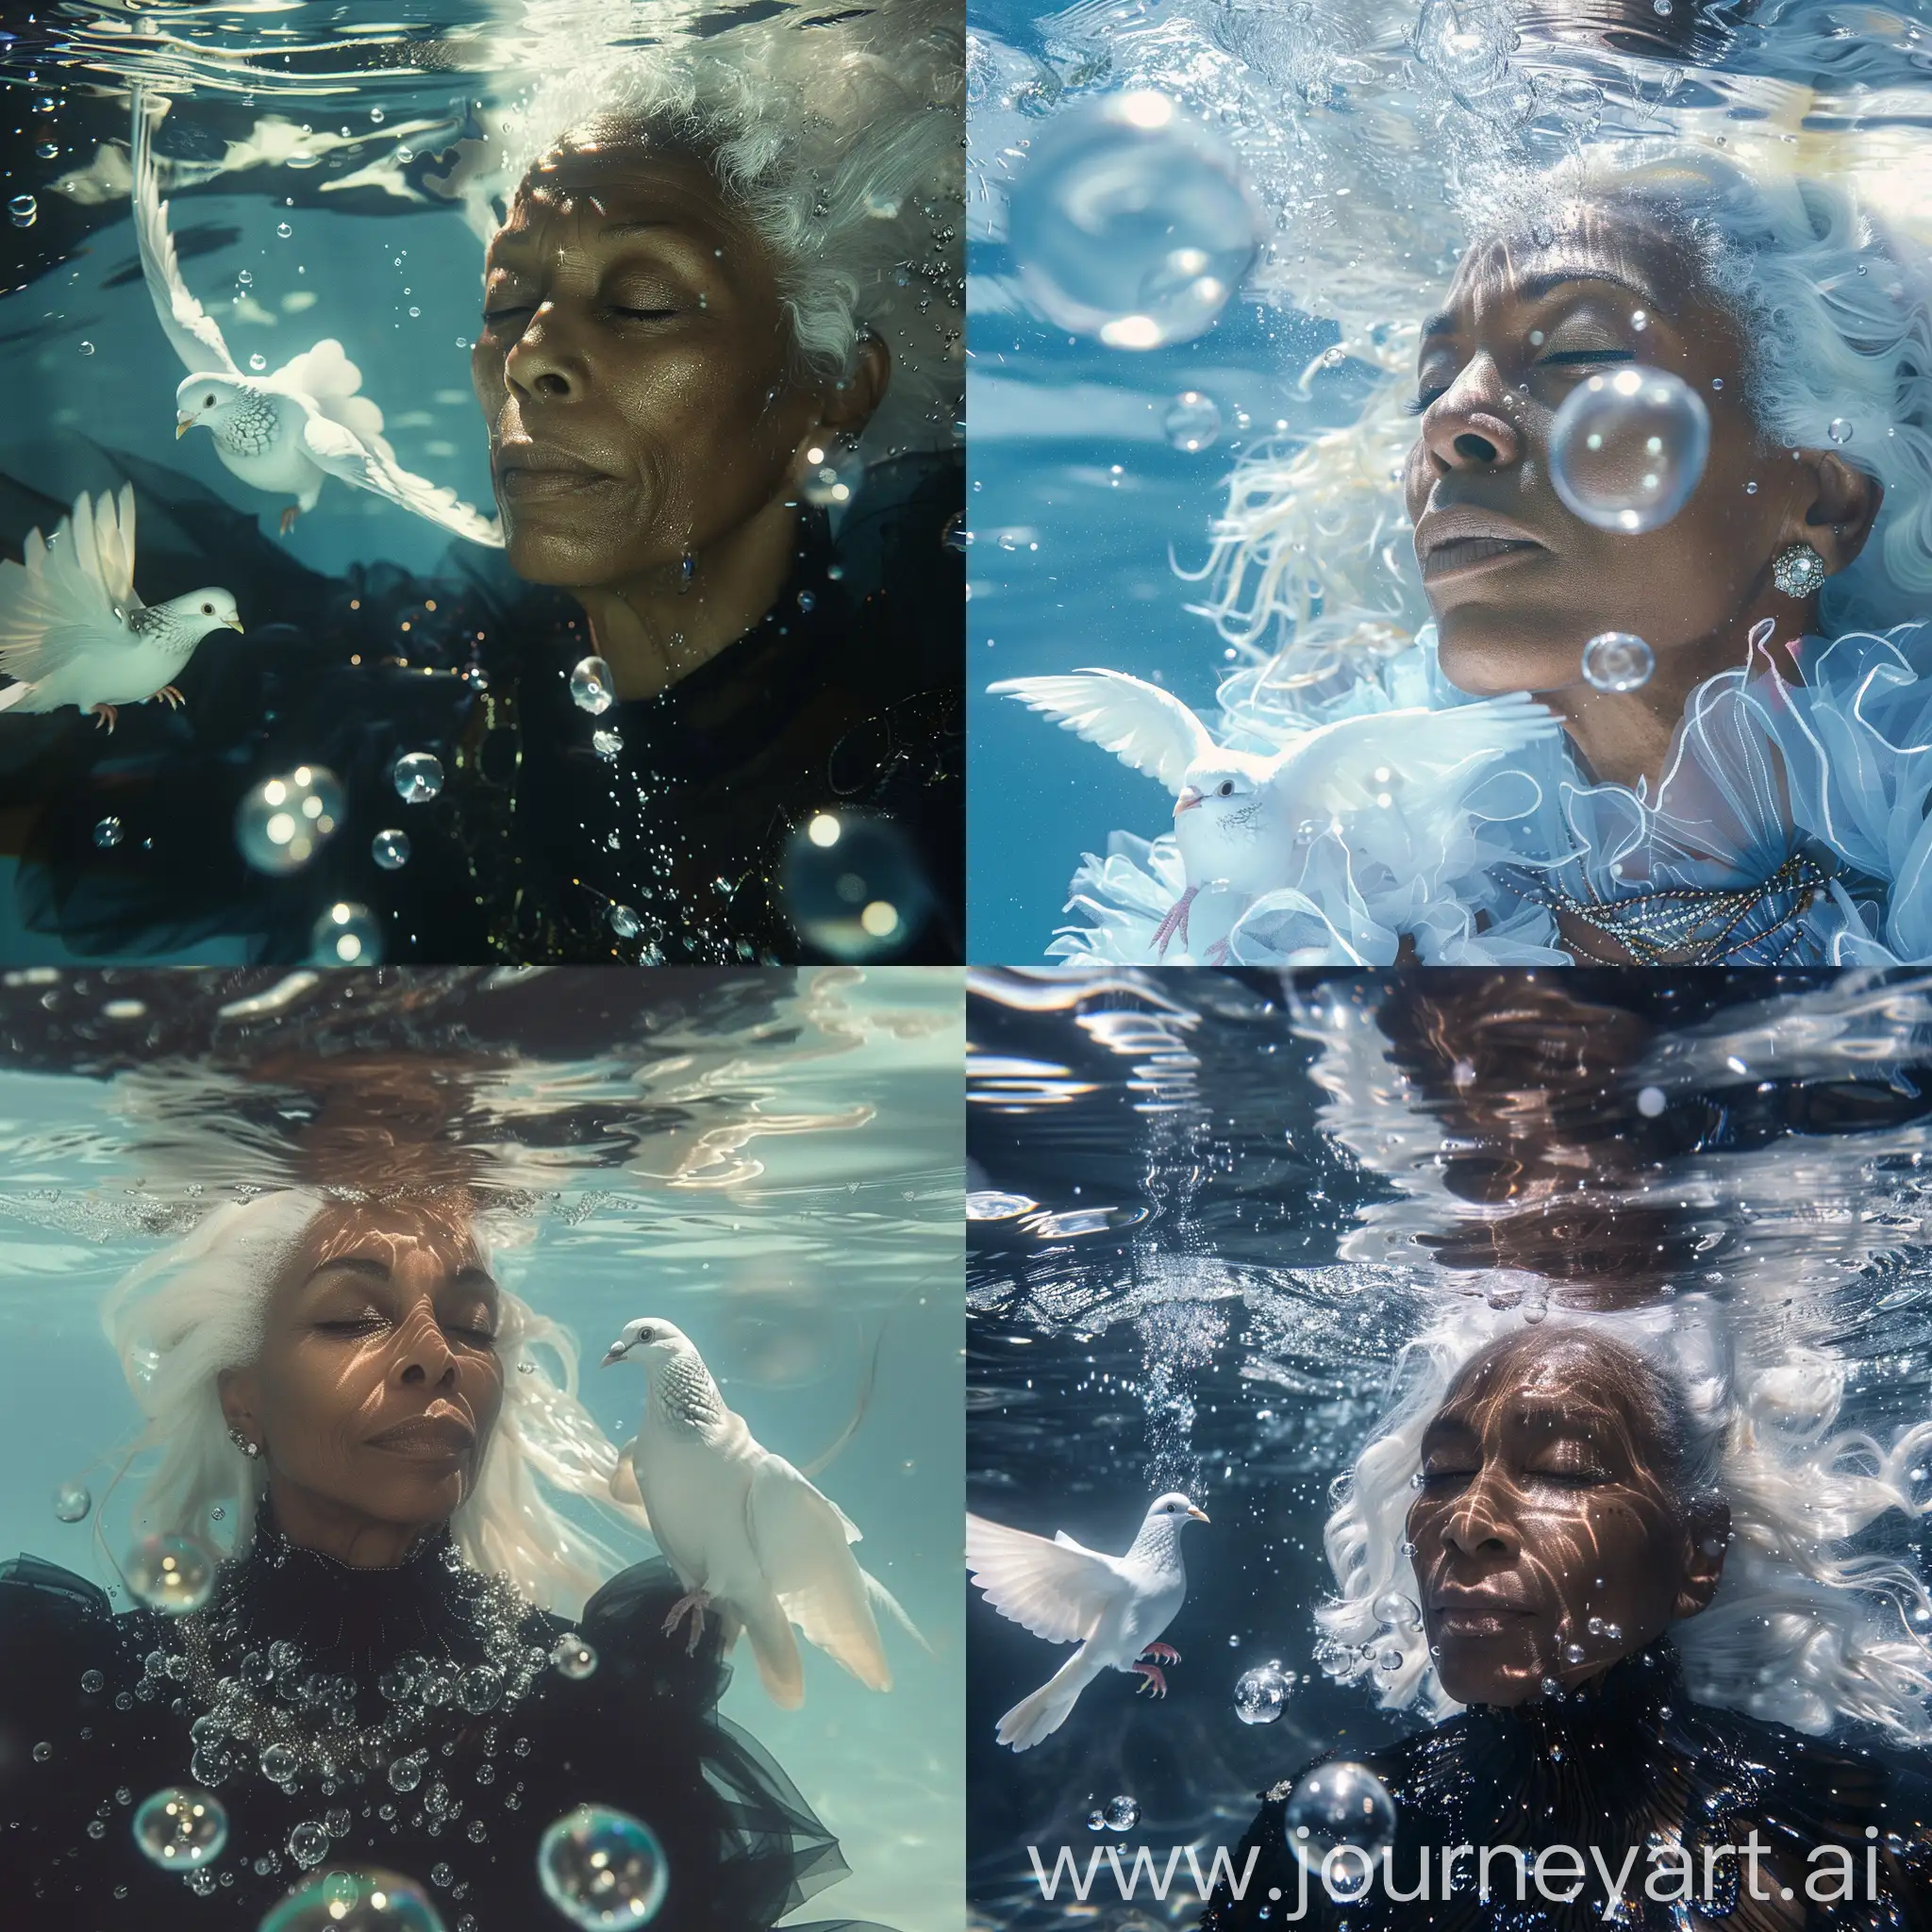 A captivating cinematic image of a beautiful black woman with white hair in his 50s, eyes closed underwater, a few large realistic bubbles under the water, the reflection of underwater light on her, a white dove swimming underwater with her